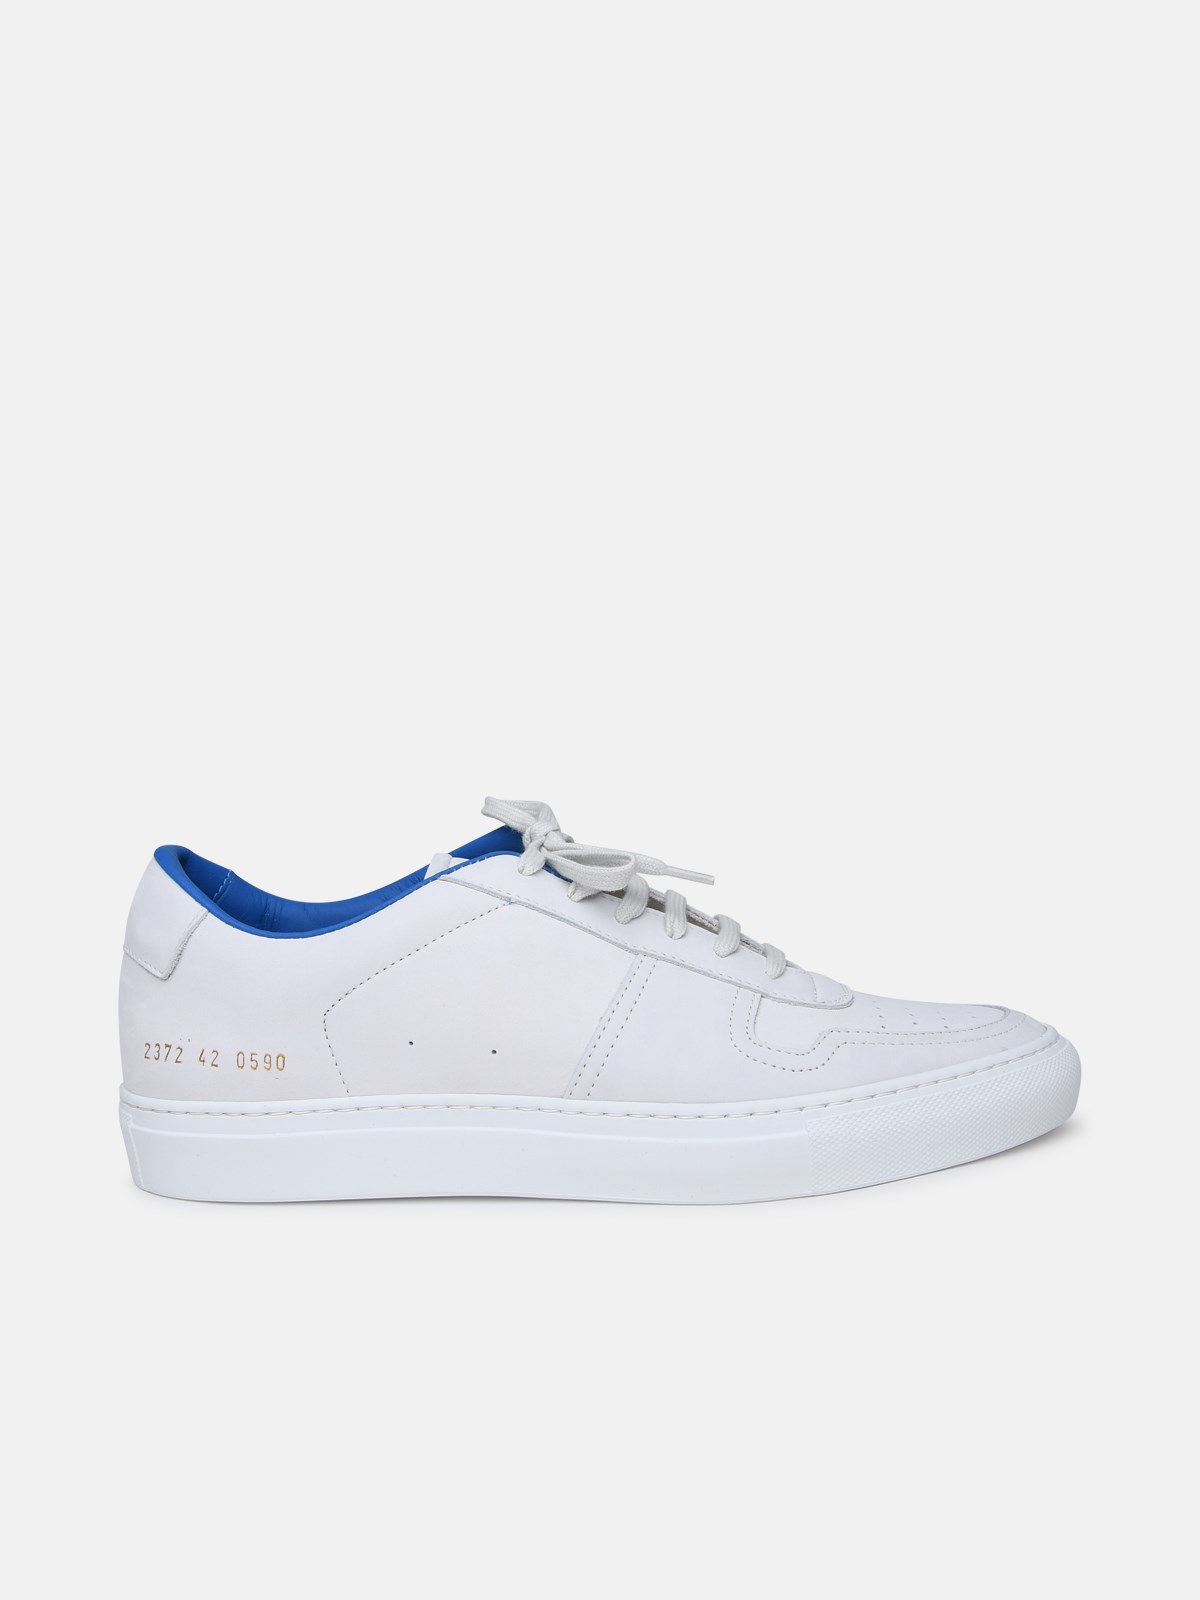 Common Projects White Nabuk Bball Summer Sneakers